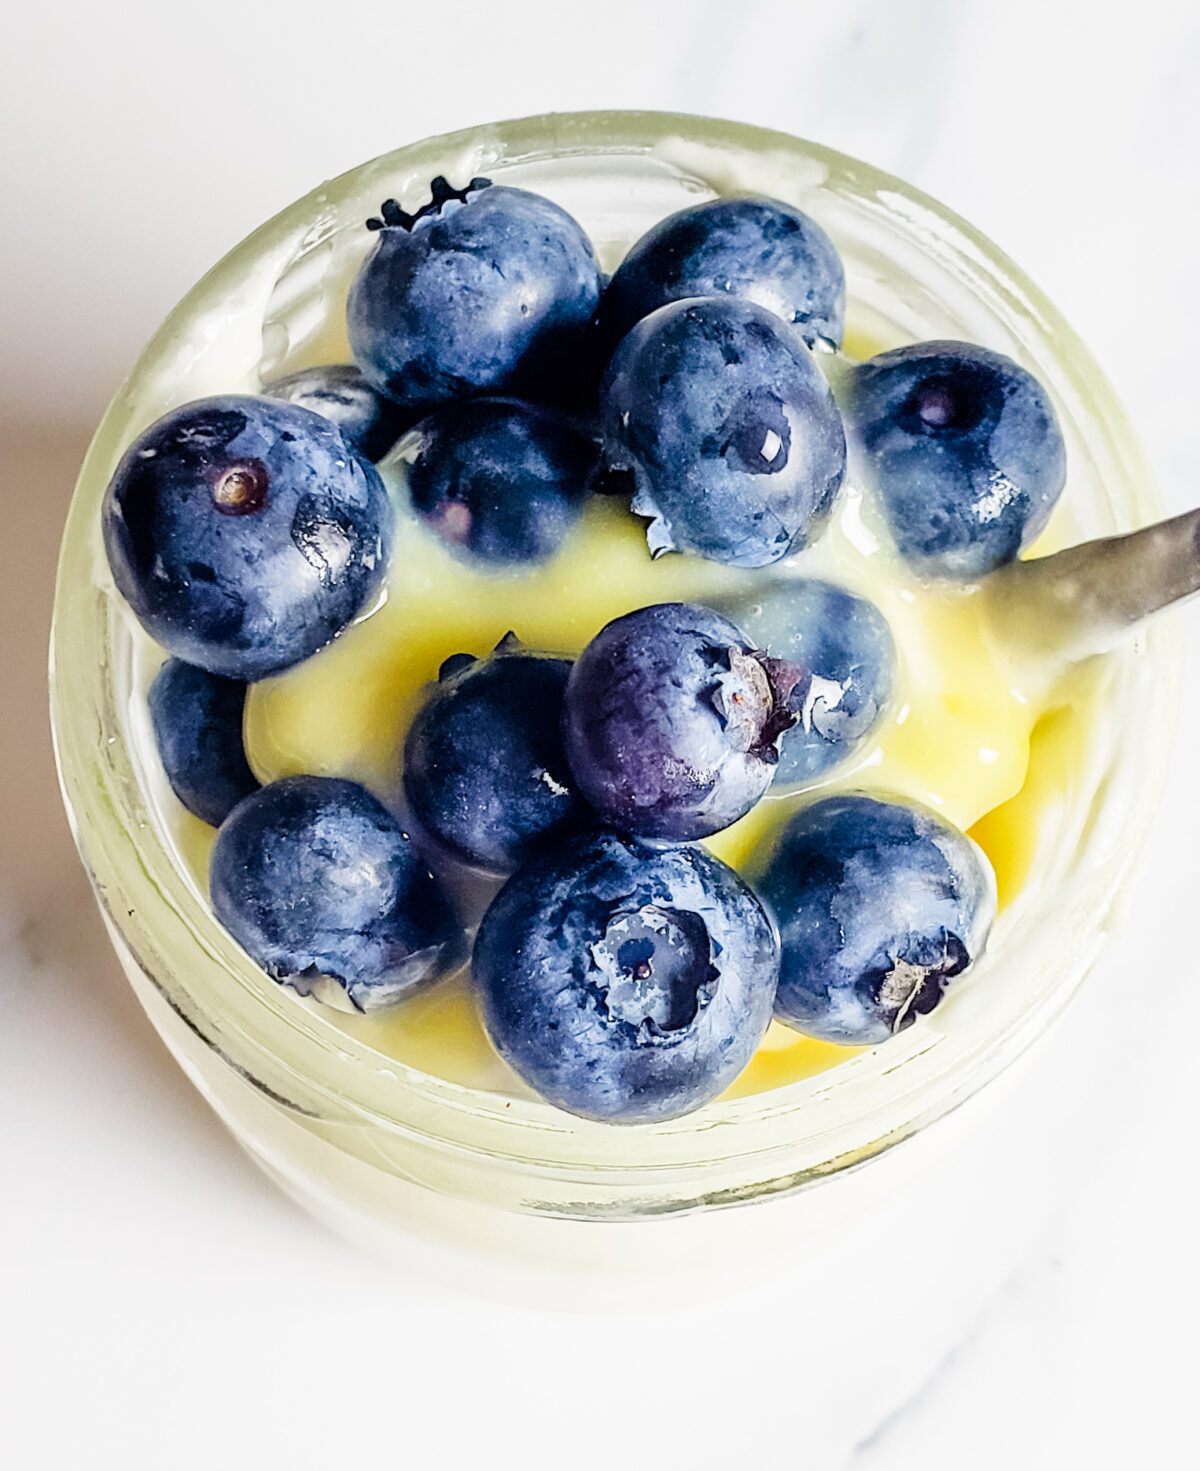 lemon mousse topped with blueberries in a mini jar